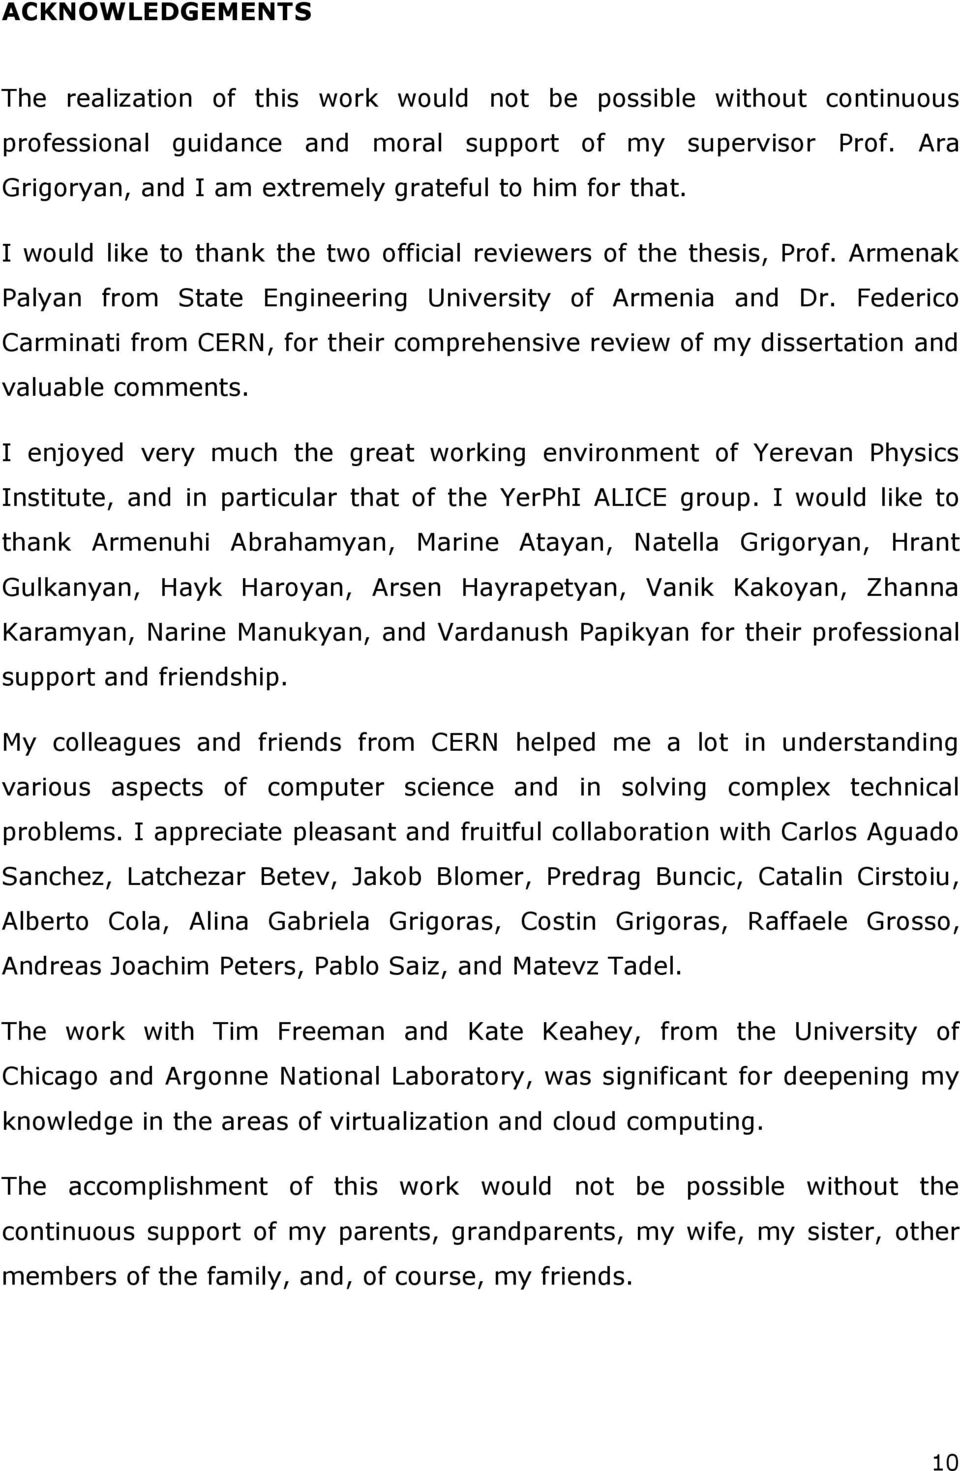 Federico Carminati from CERN, for their comprehensive review of my dissertation and valuable comments.